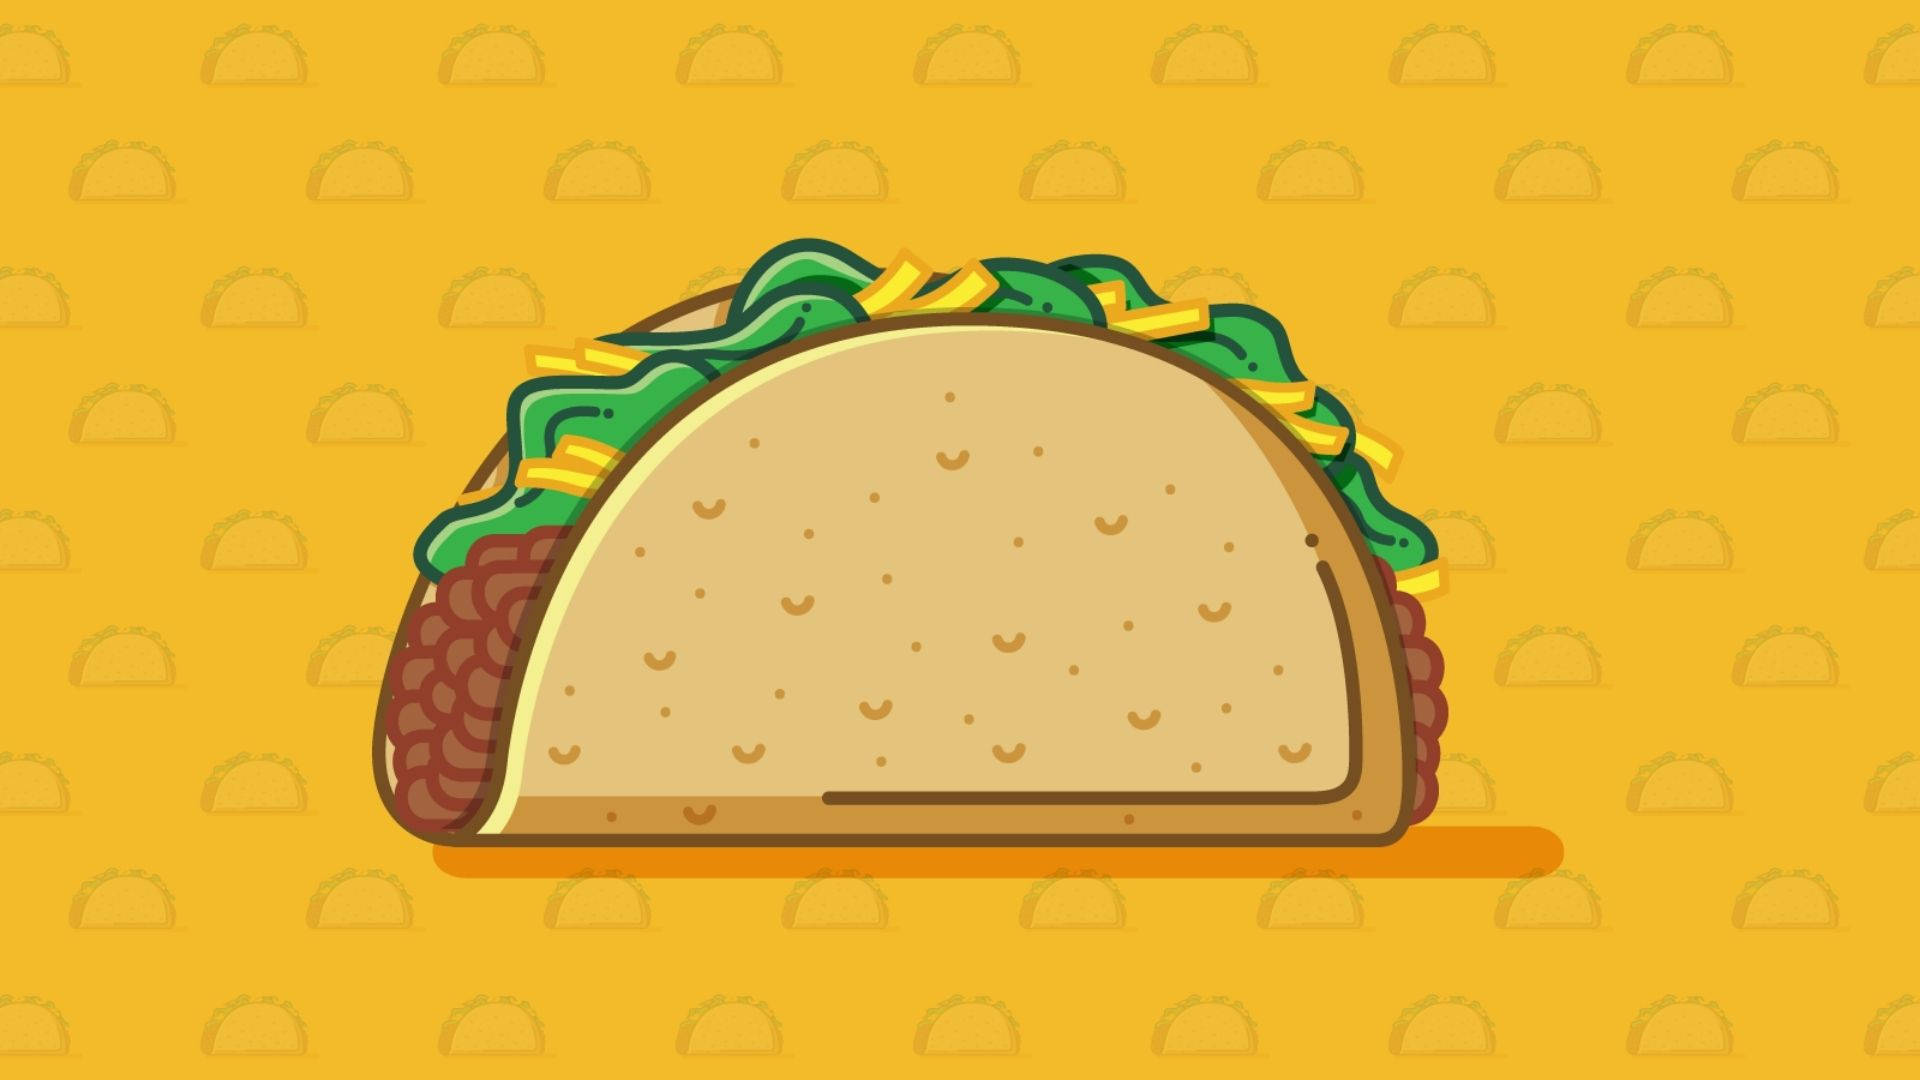 Taco 1920X1080 Wallpaper and Background Image